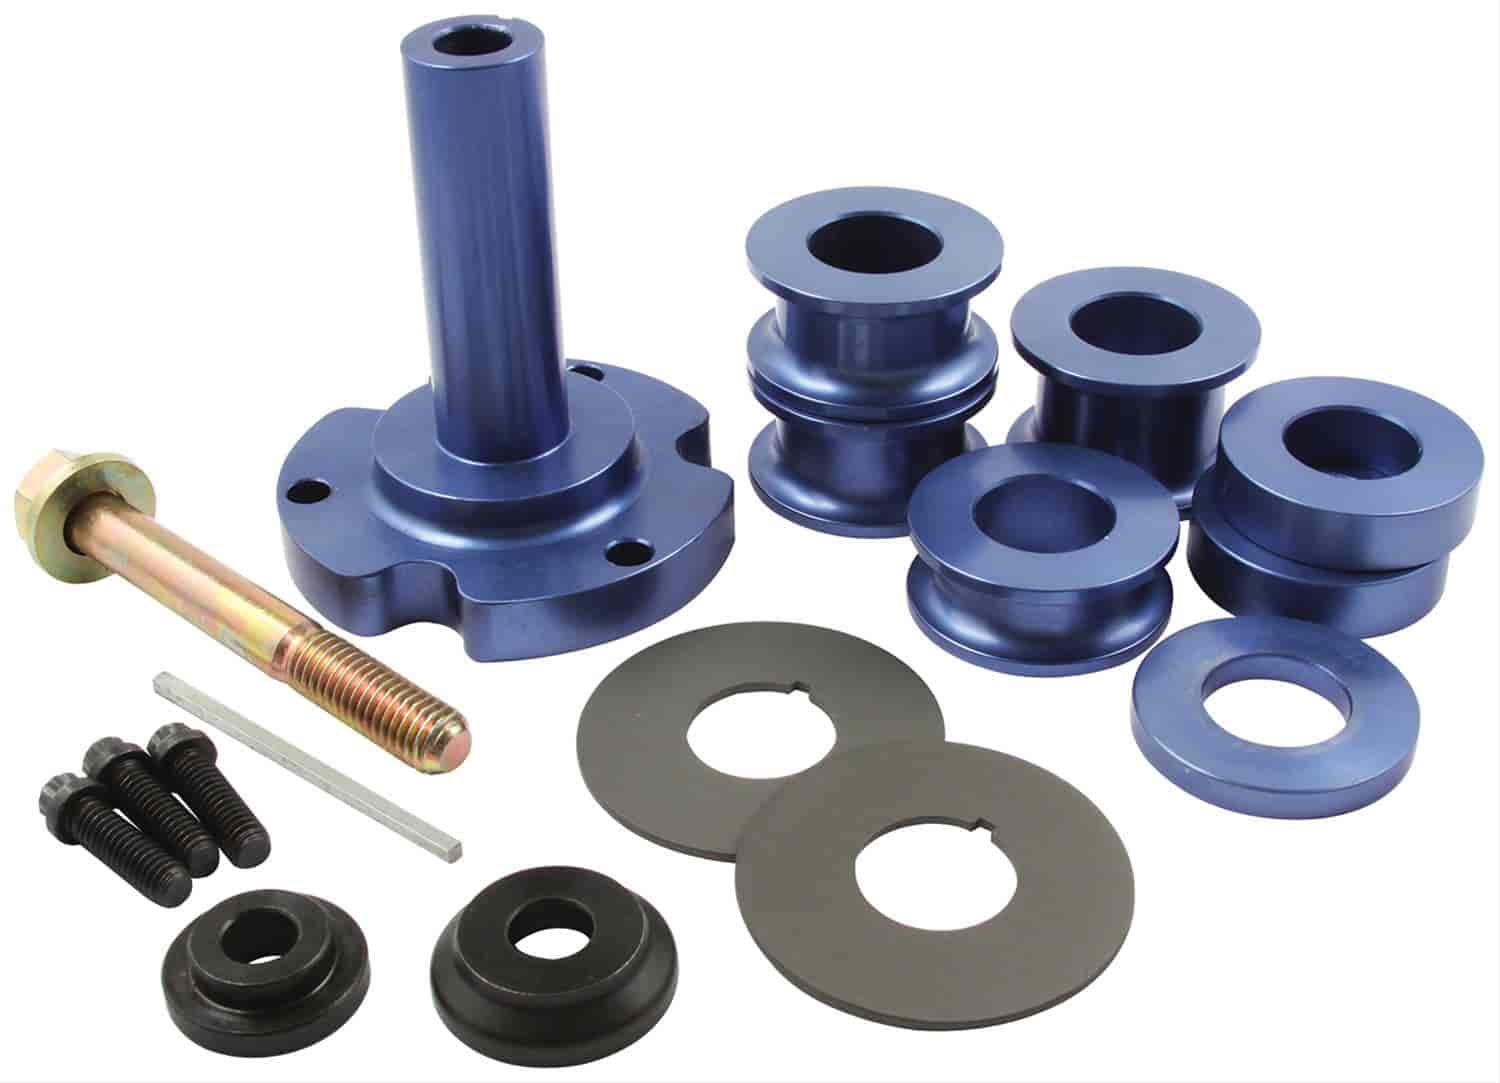 Crank Pulley Mandrel Kit Includes: Spacers, Pulley Guides, and Bolts